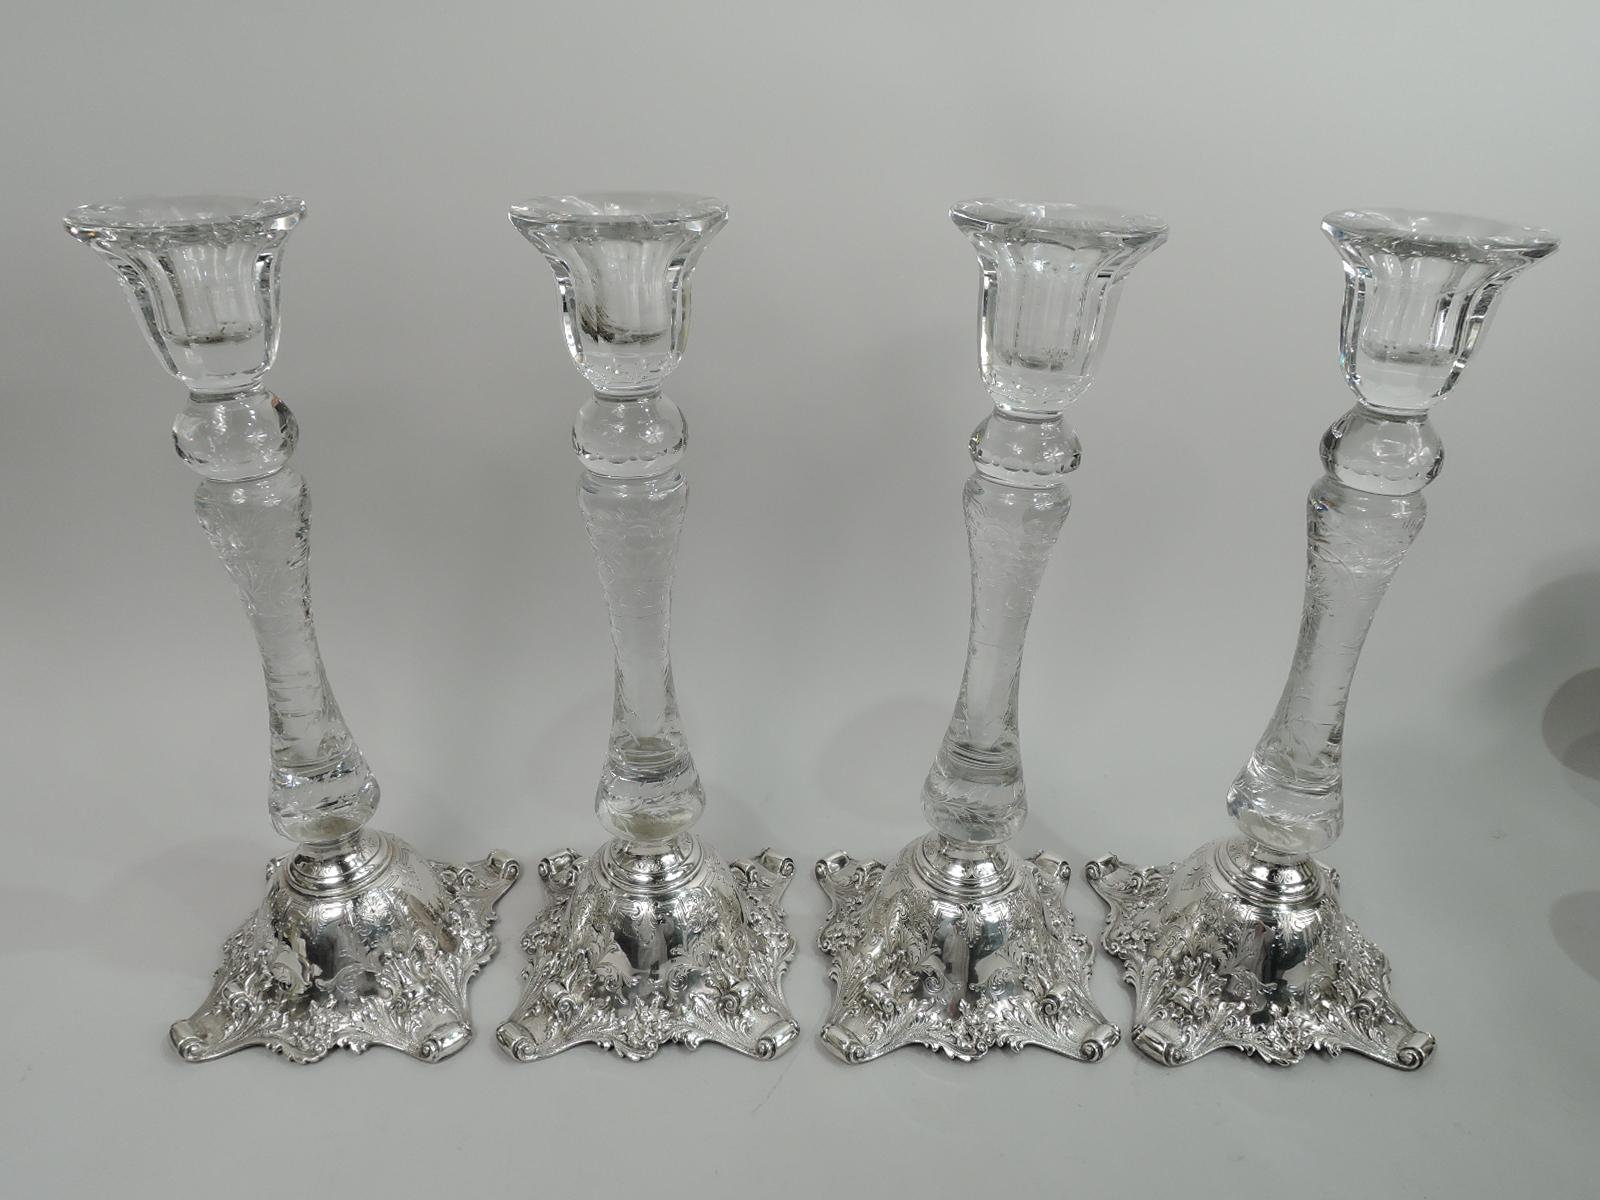 Set of 4 turn-of-the-century Edwardian Classical sterling silver-mounted crystal candlesticks. Made by Graff, Washbourne & Dunn in New York. Each: Knopped and baluster shaft with engraved flowers and leaves surmounted by faceted urn socket. Domed